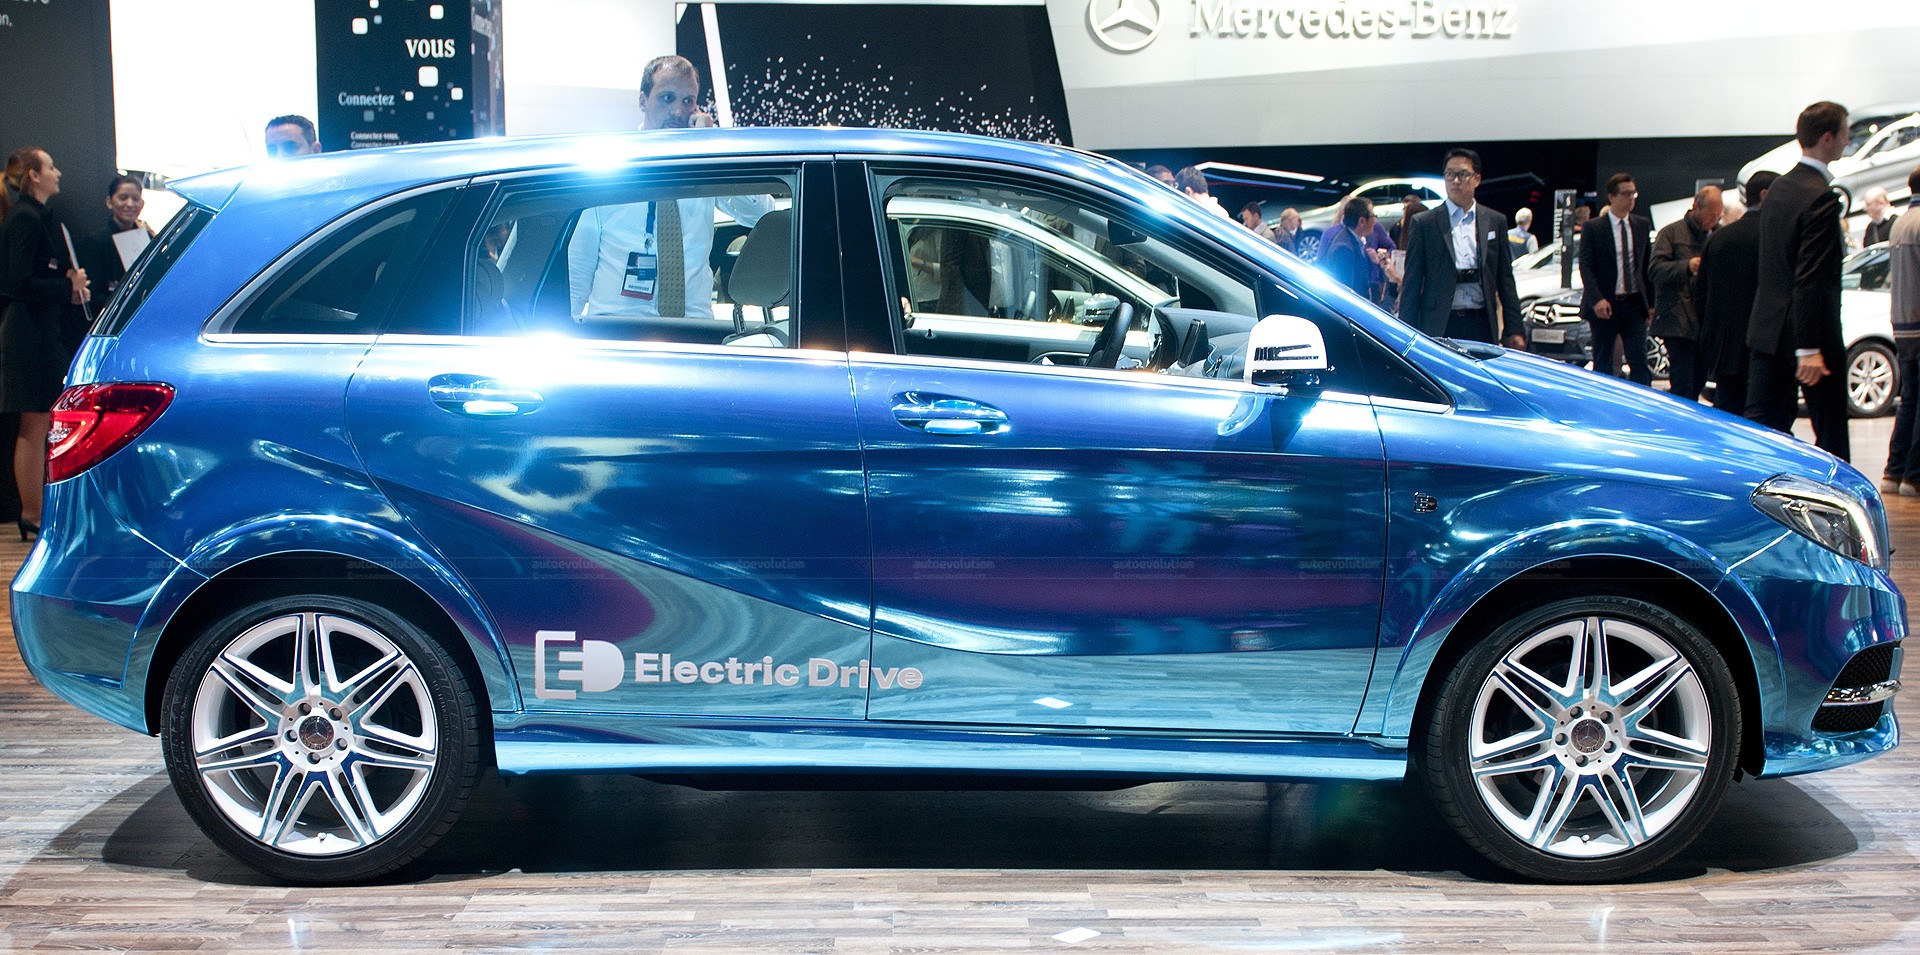 Mercedes kills their only electric car (which they never actually tried to  sell)